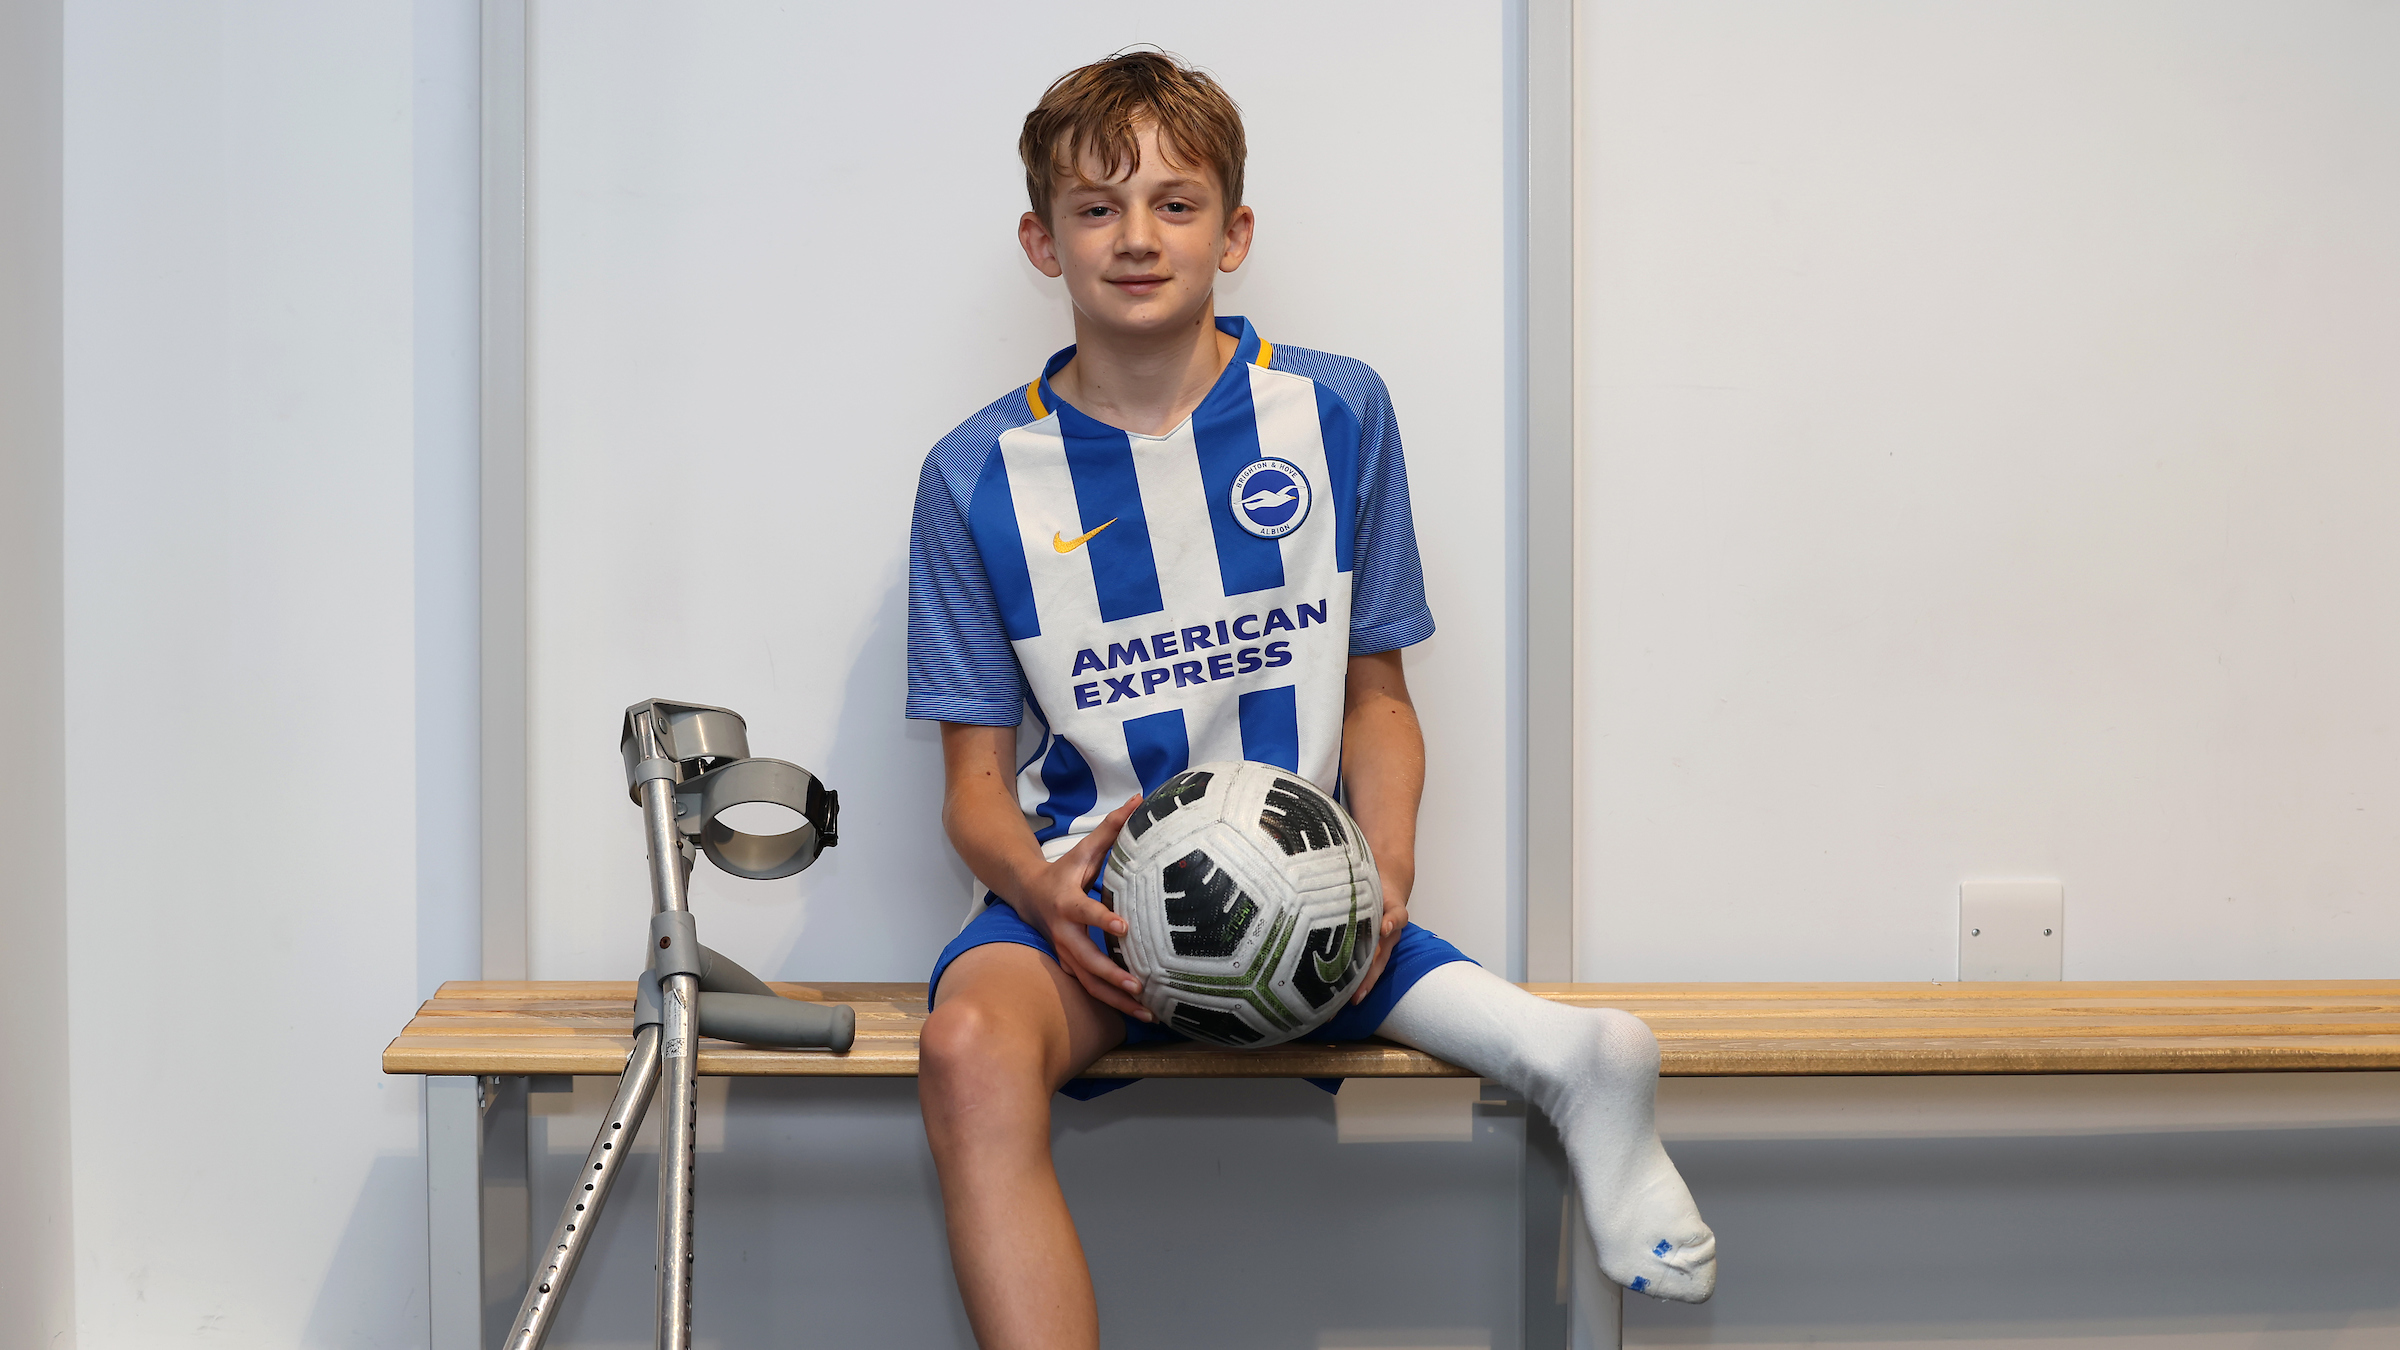 Charlie &#8211; &#8220;I want to be the best amputee footballer in the world&#8221;